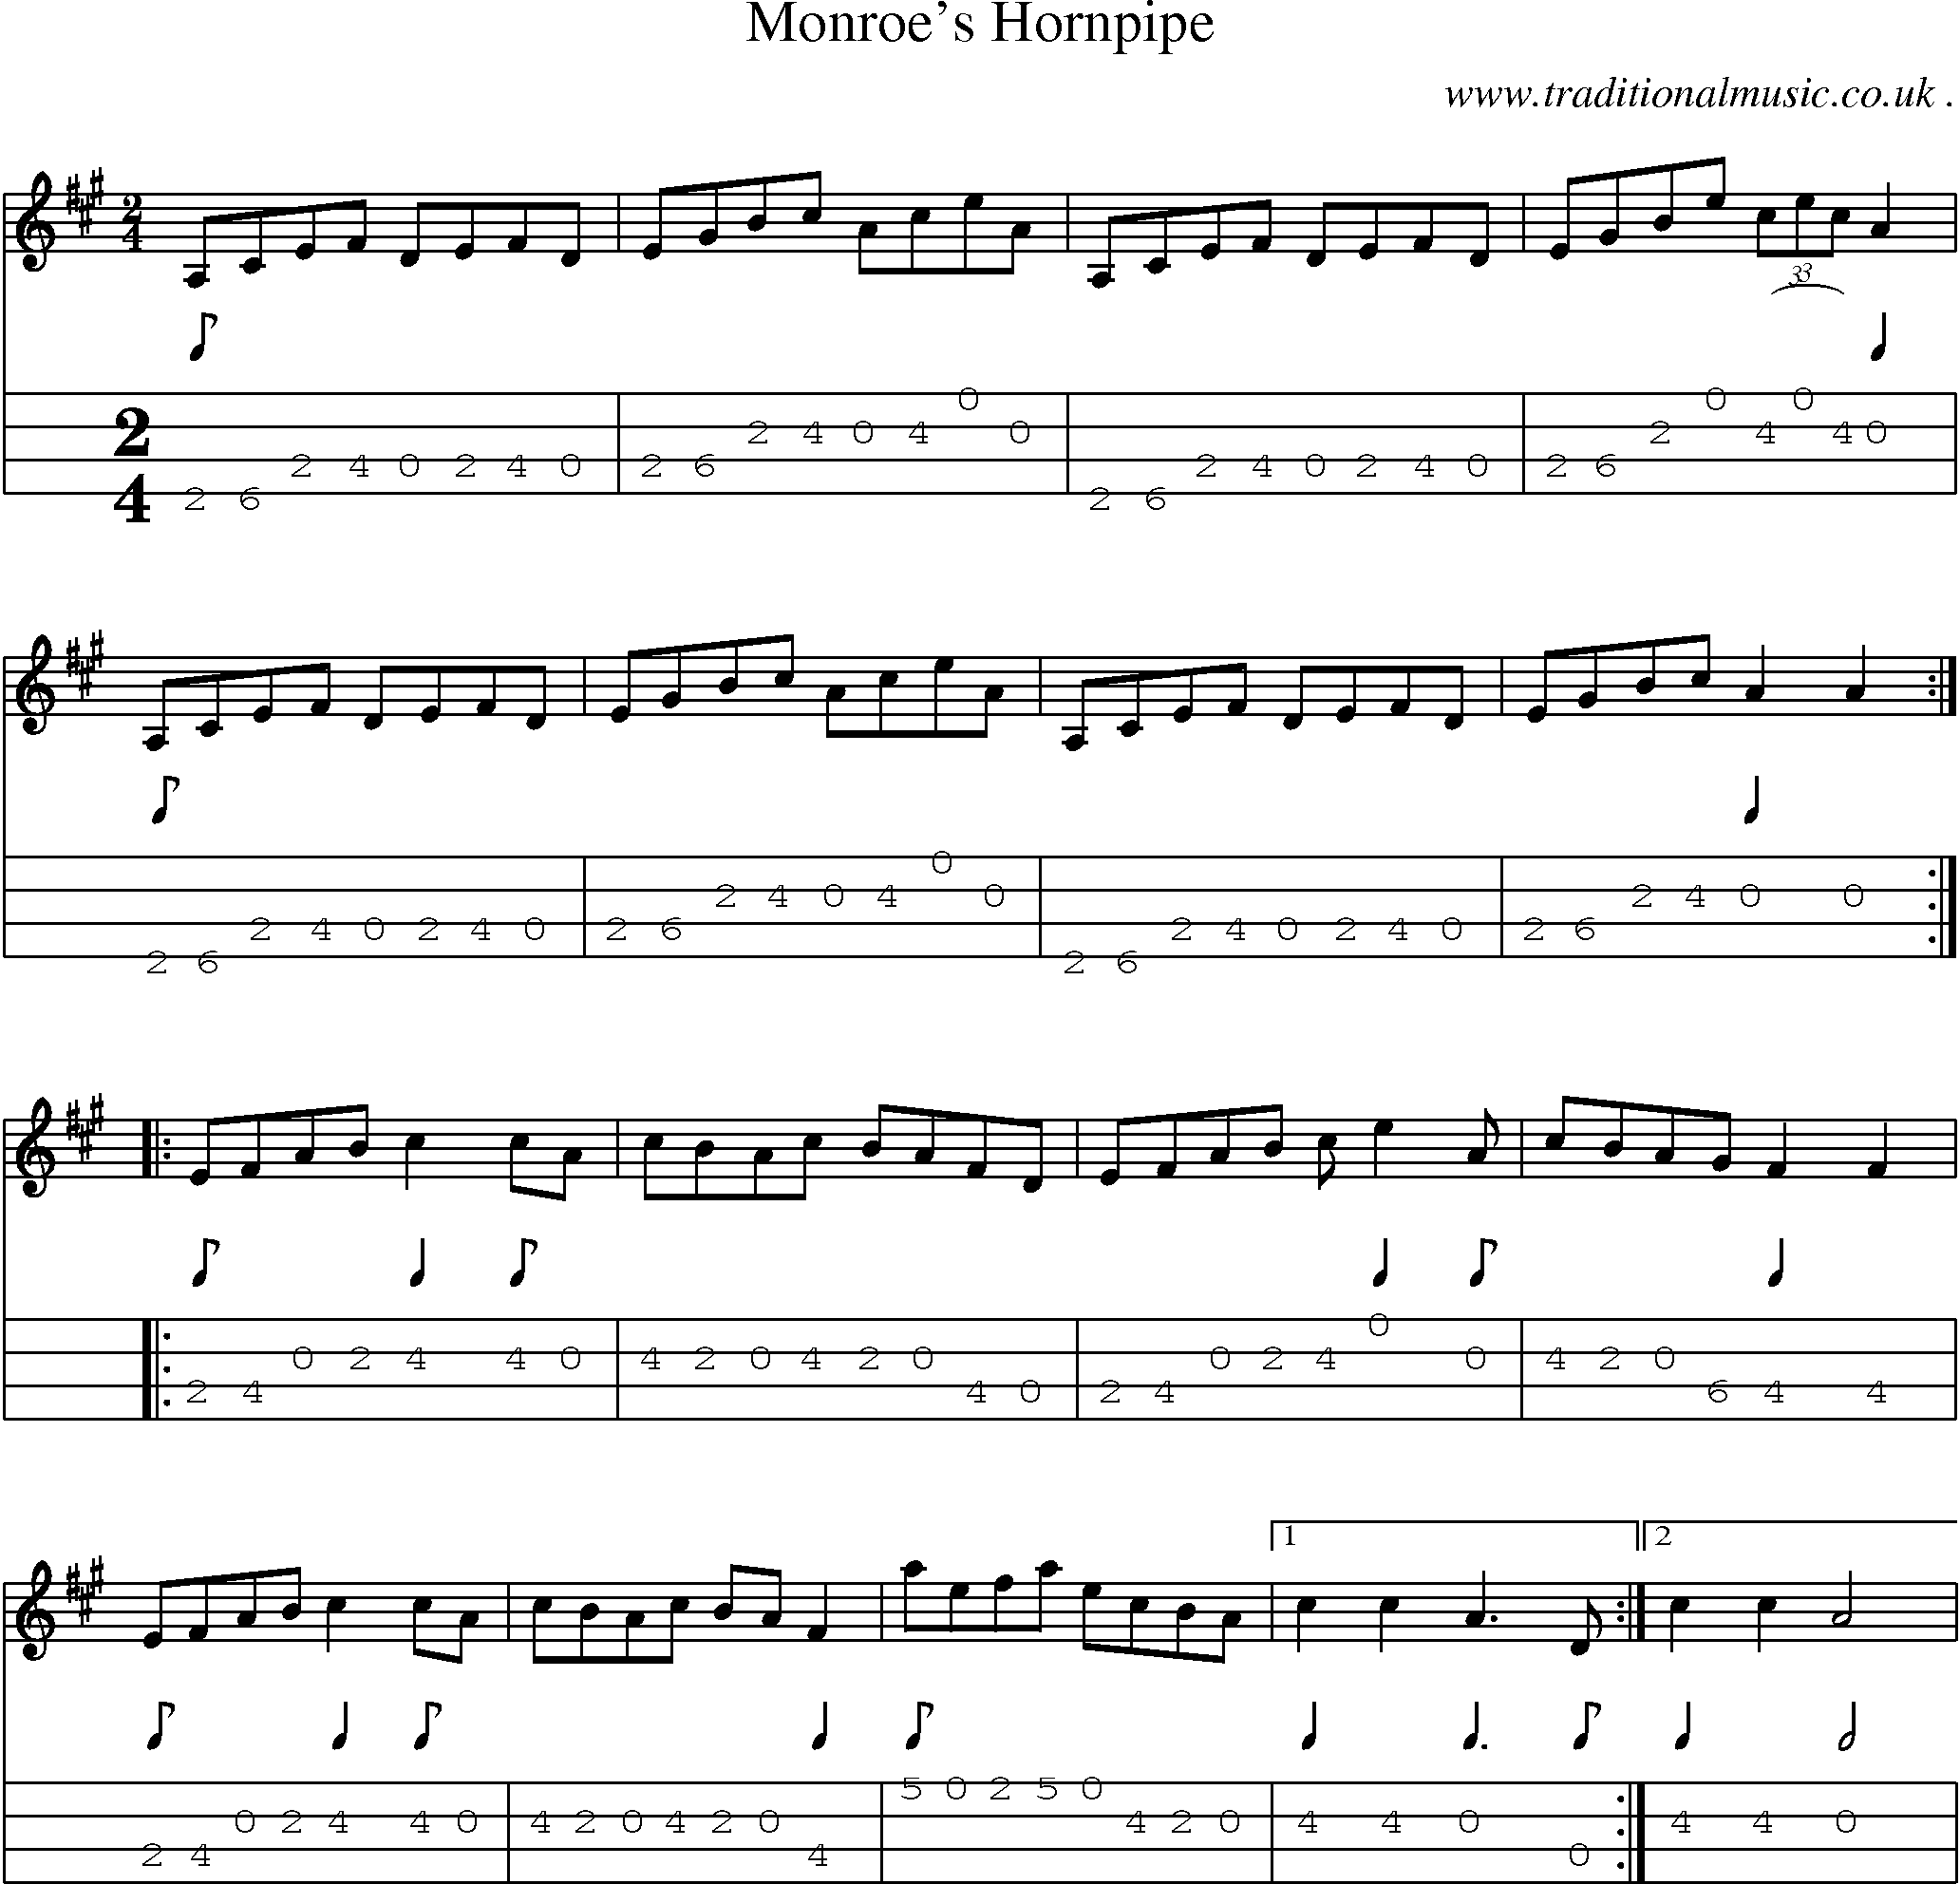 Music Score and Mandolin Tabs for Monroes Hornpipe